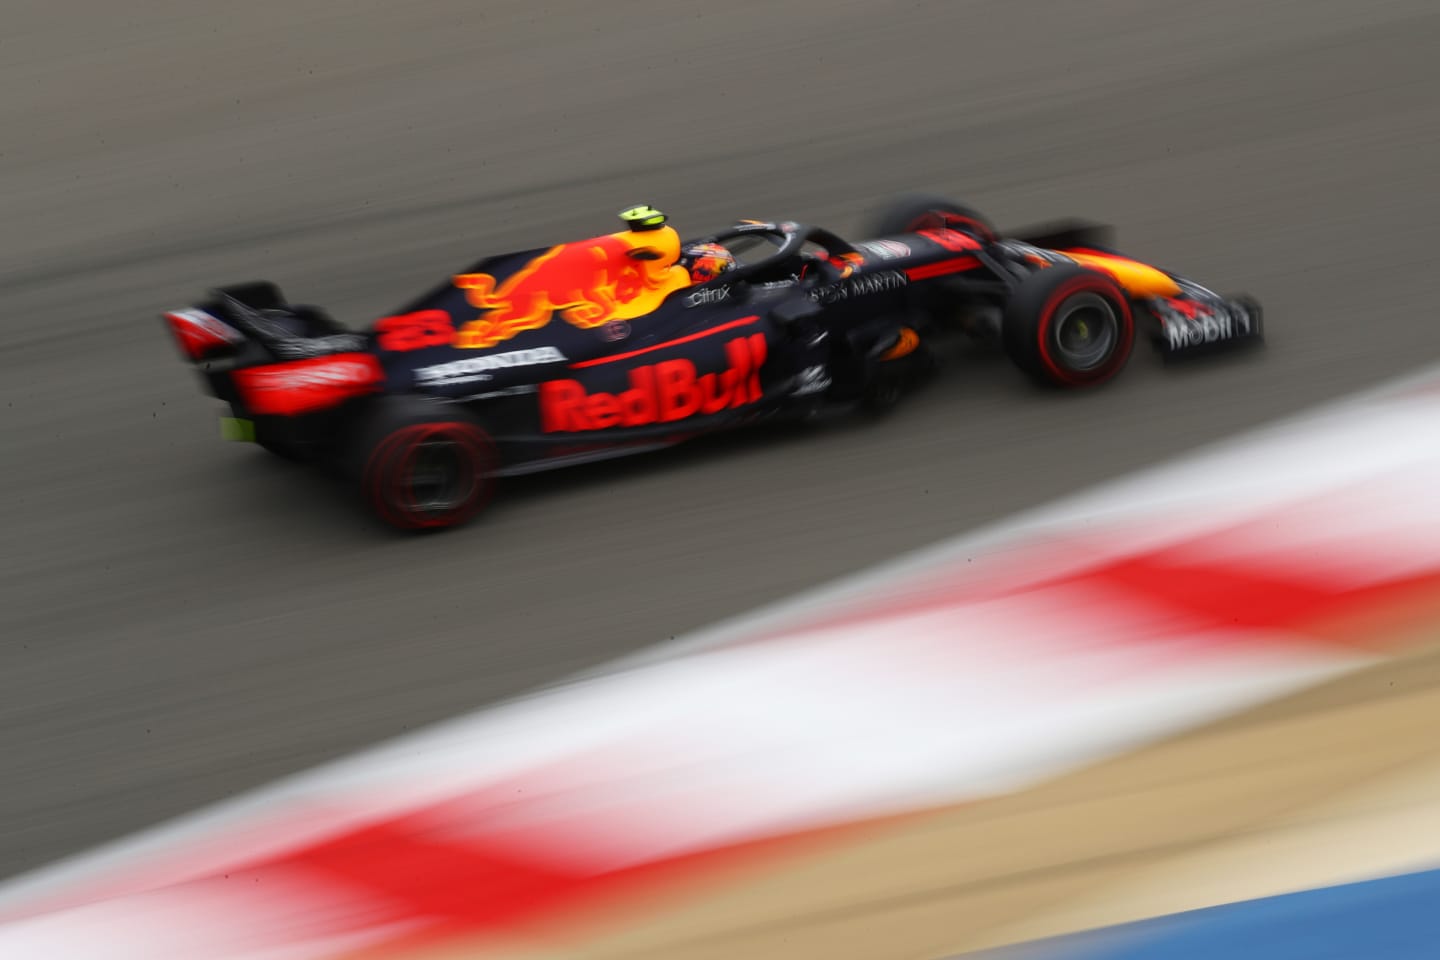 BAHRAIN, BAHRAIN - NOVEMBER 28: Alexander Albon of Thailand driving the (23) Aston Martin Red Bull Racing RB16 on track during final practice ahead of the F1 Grand Prix of Bahrain at Bahrain International Circuit on November 28, 2020 in Bahrain, Bahrain. (Photo by Bryn Lennon/Getty Images)